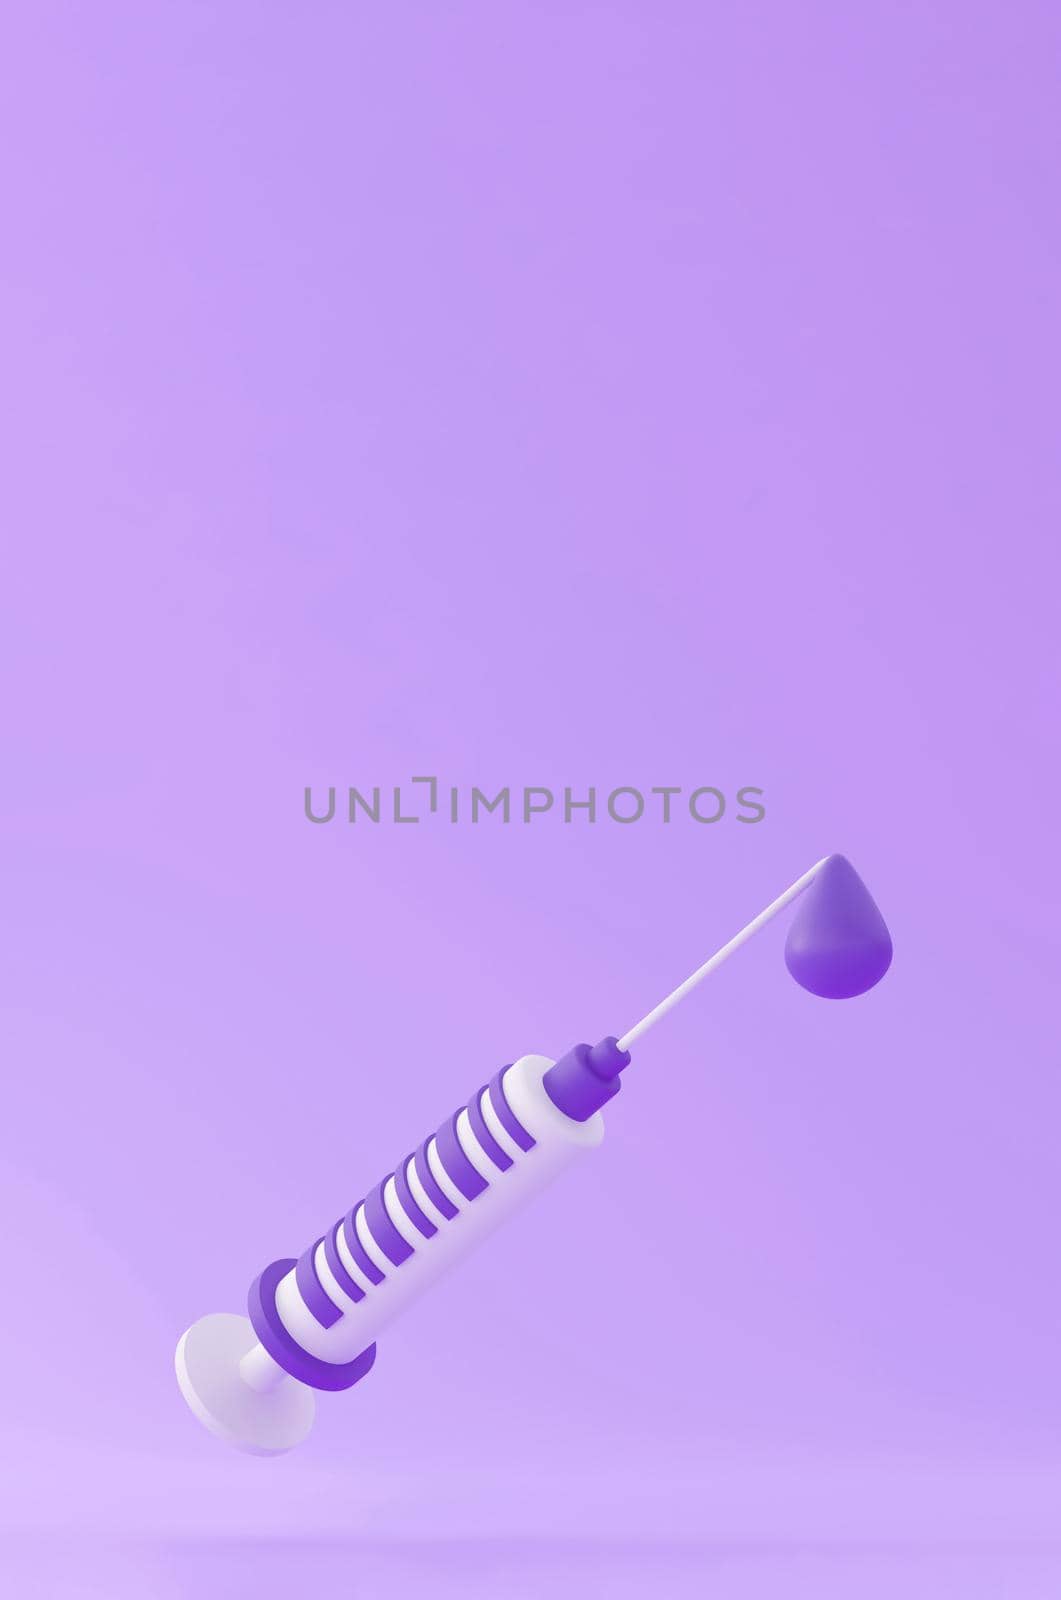 3d Syringe for vaccine, vaccination, injection, flu shot. vertical Vaccination icon with Medical equipment. Minimalism concept. 3d illustration render